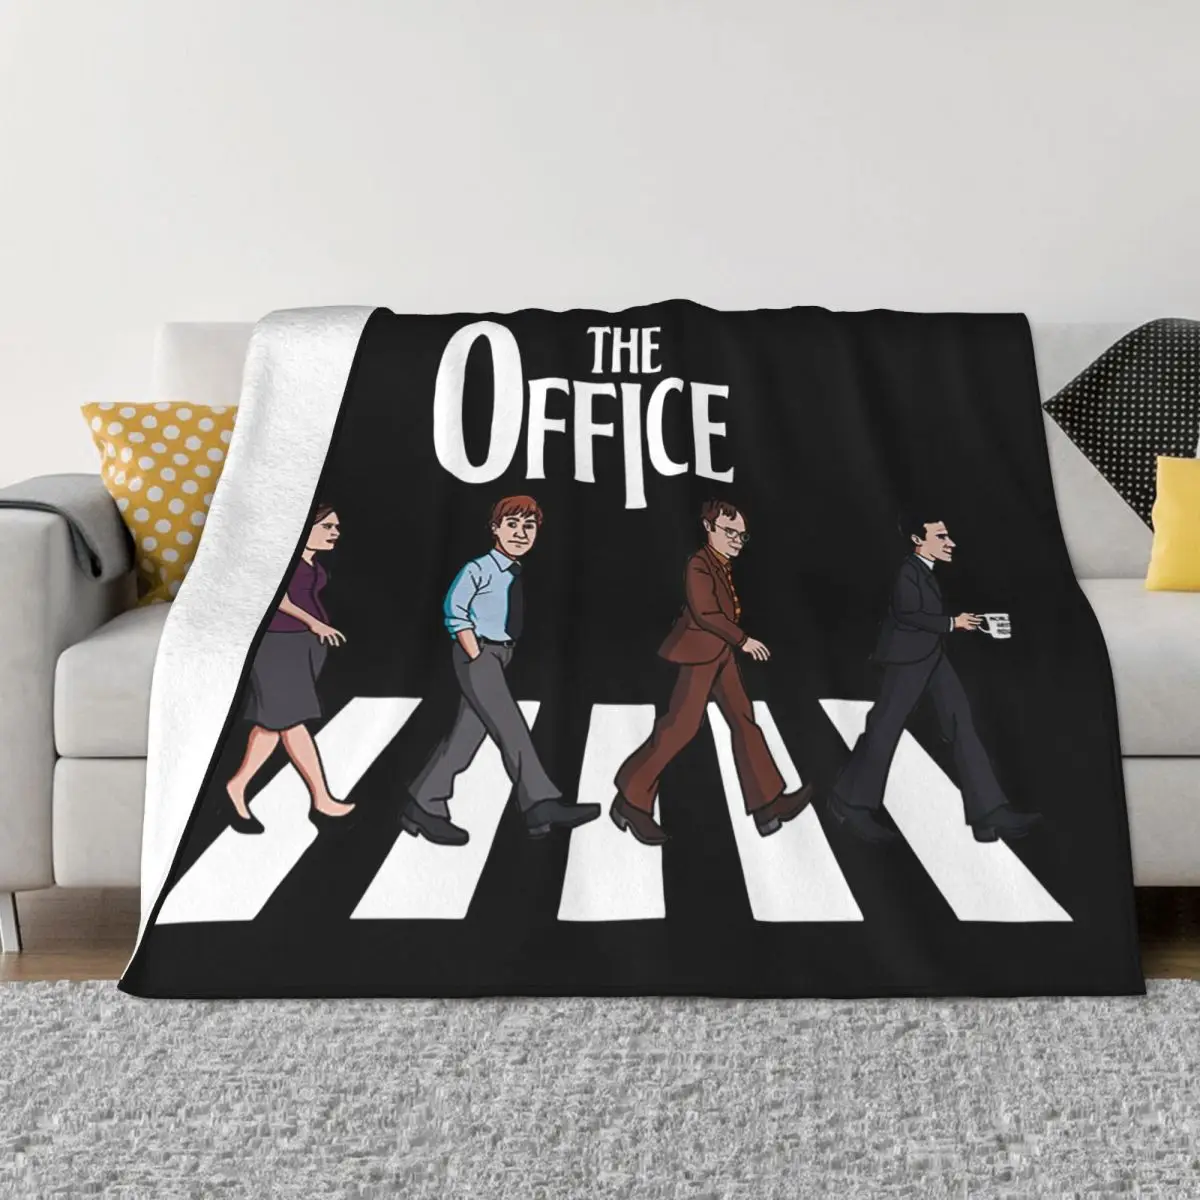 

The Office Road Dwight Schrute Blanket Cover Flannel Jim Halpert Tv Show Warm Throw Blankets for Car Sofa Couch Bedspread